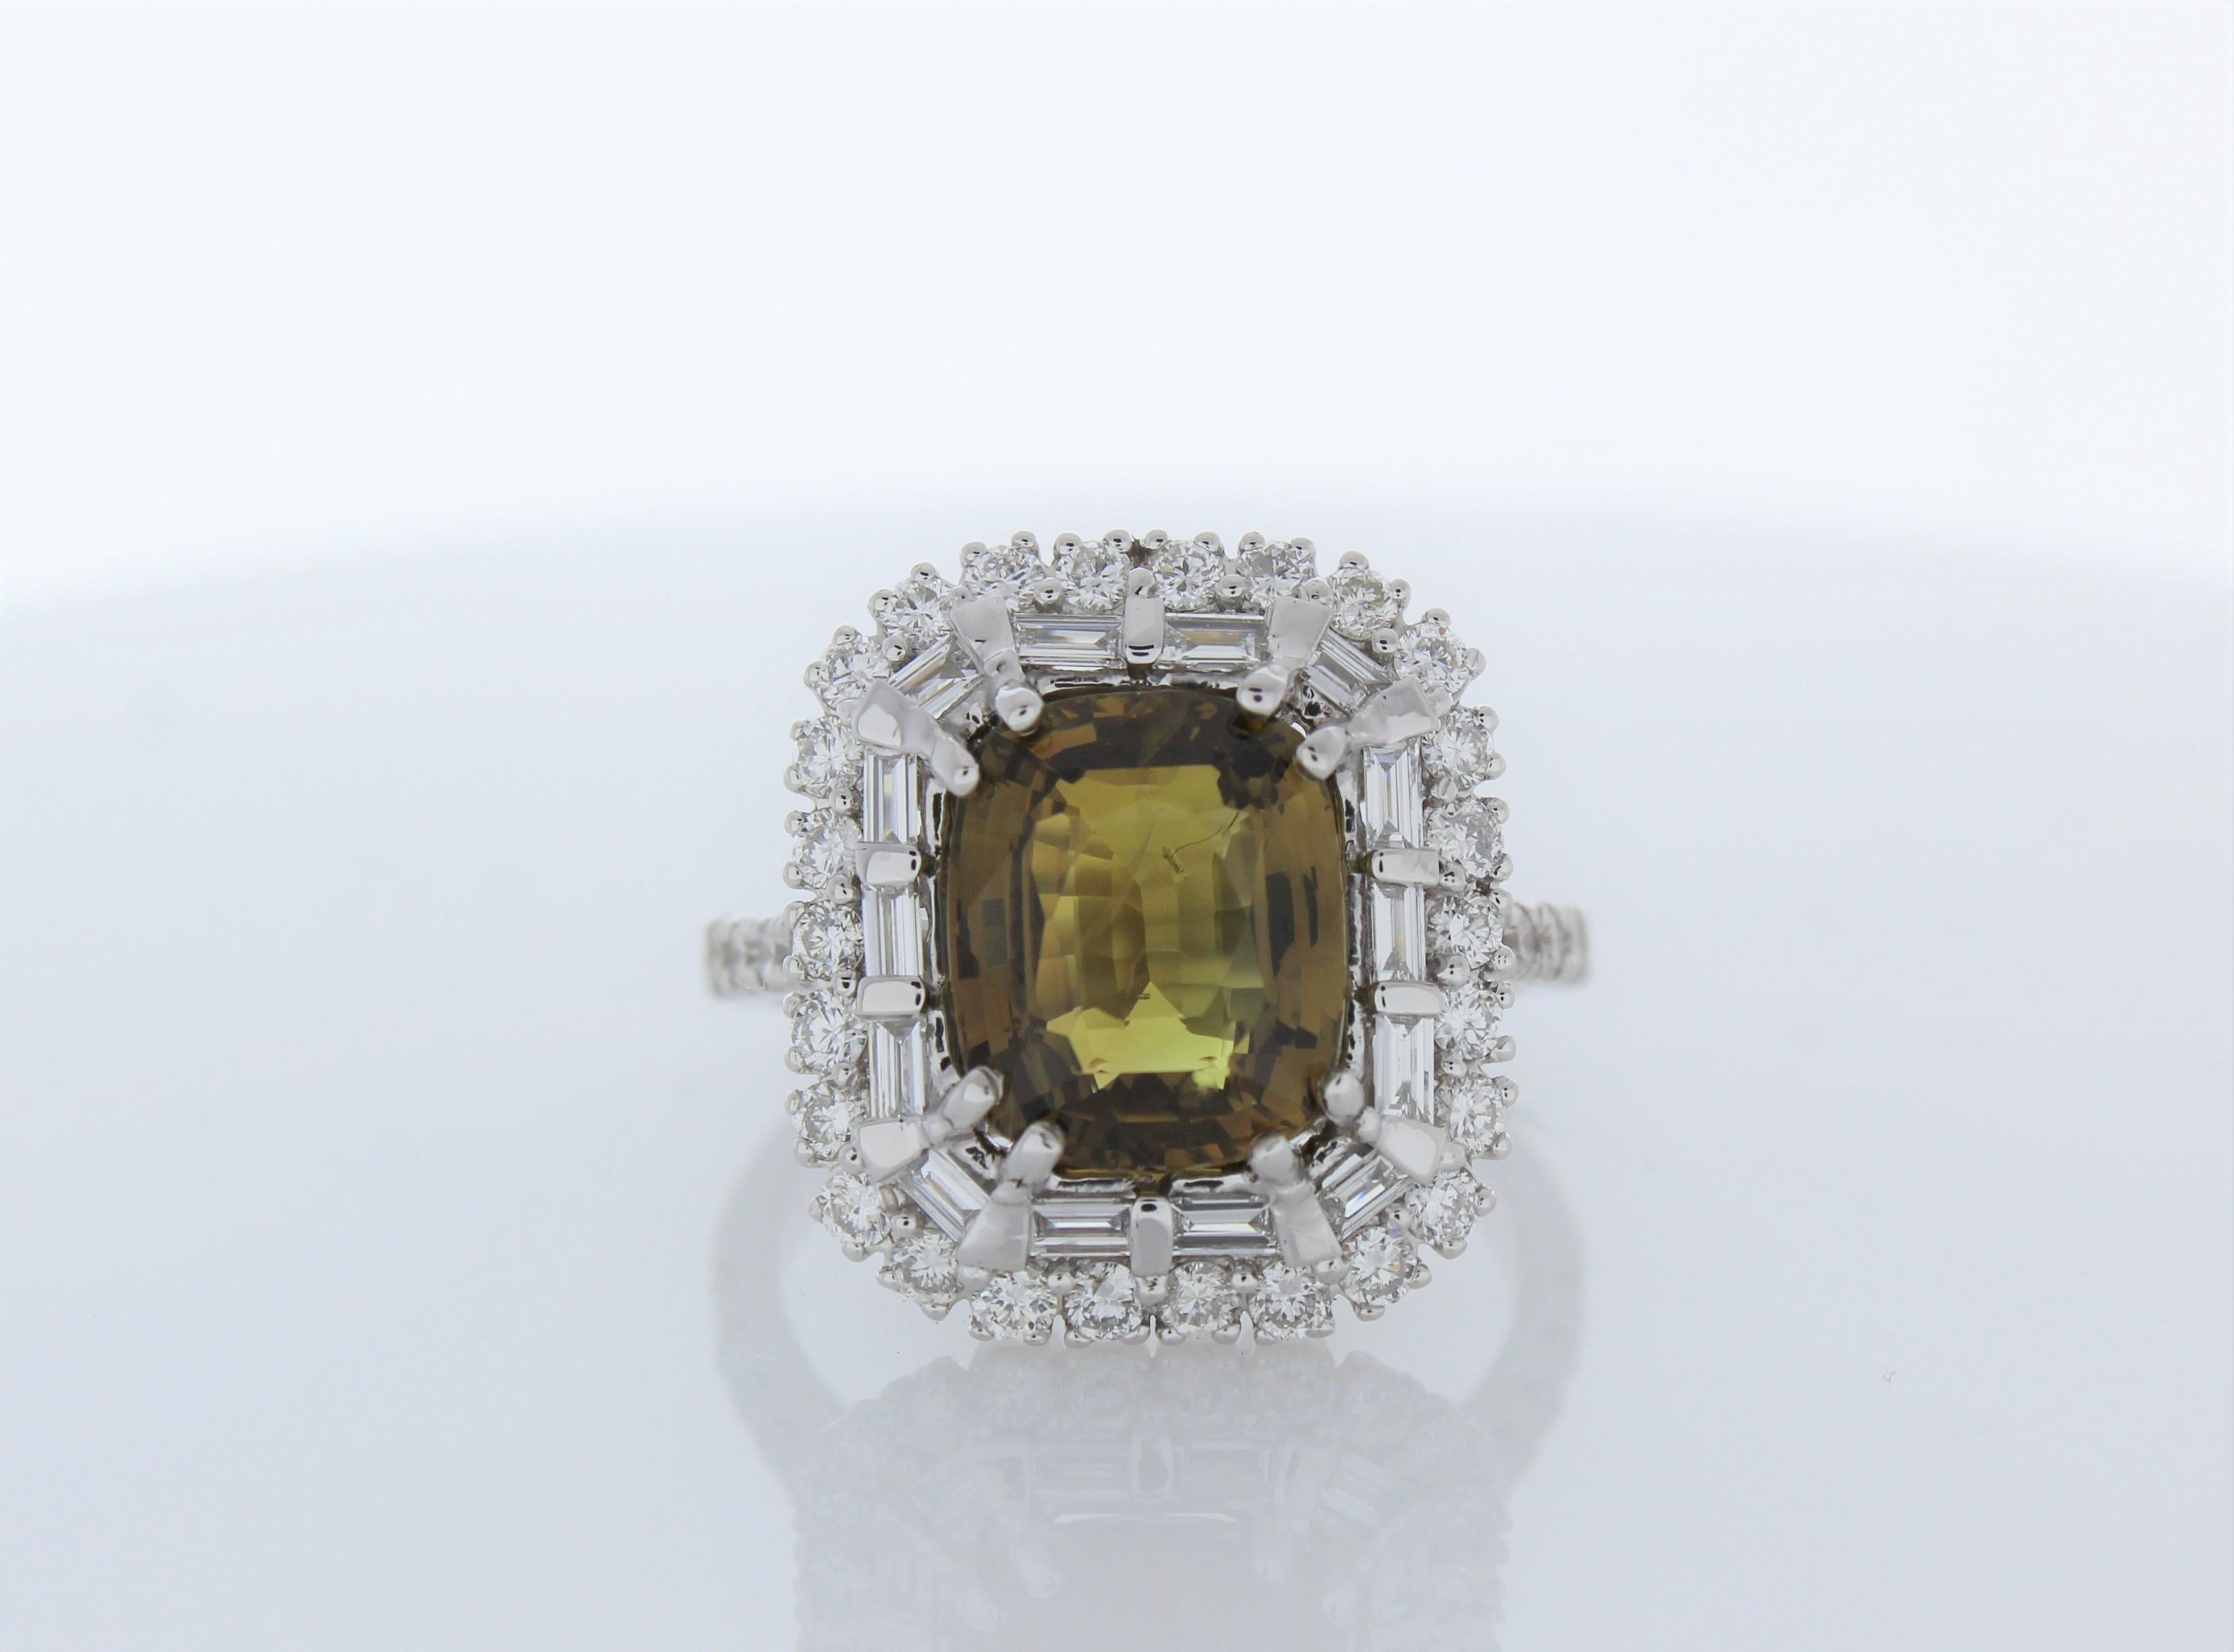 Your Alexandrite search is over. The 4.04 carat Alexandrite is one of the most important gems in our collection. It's BGL certified and cushion. It exhibits a brilliant olive green body with dancing undertones of light green across its pavilion. Its